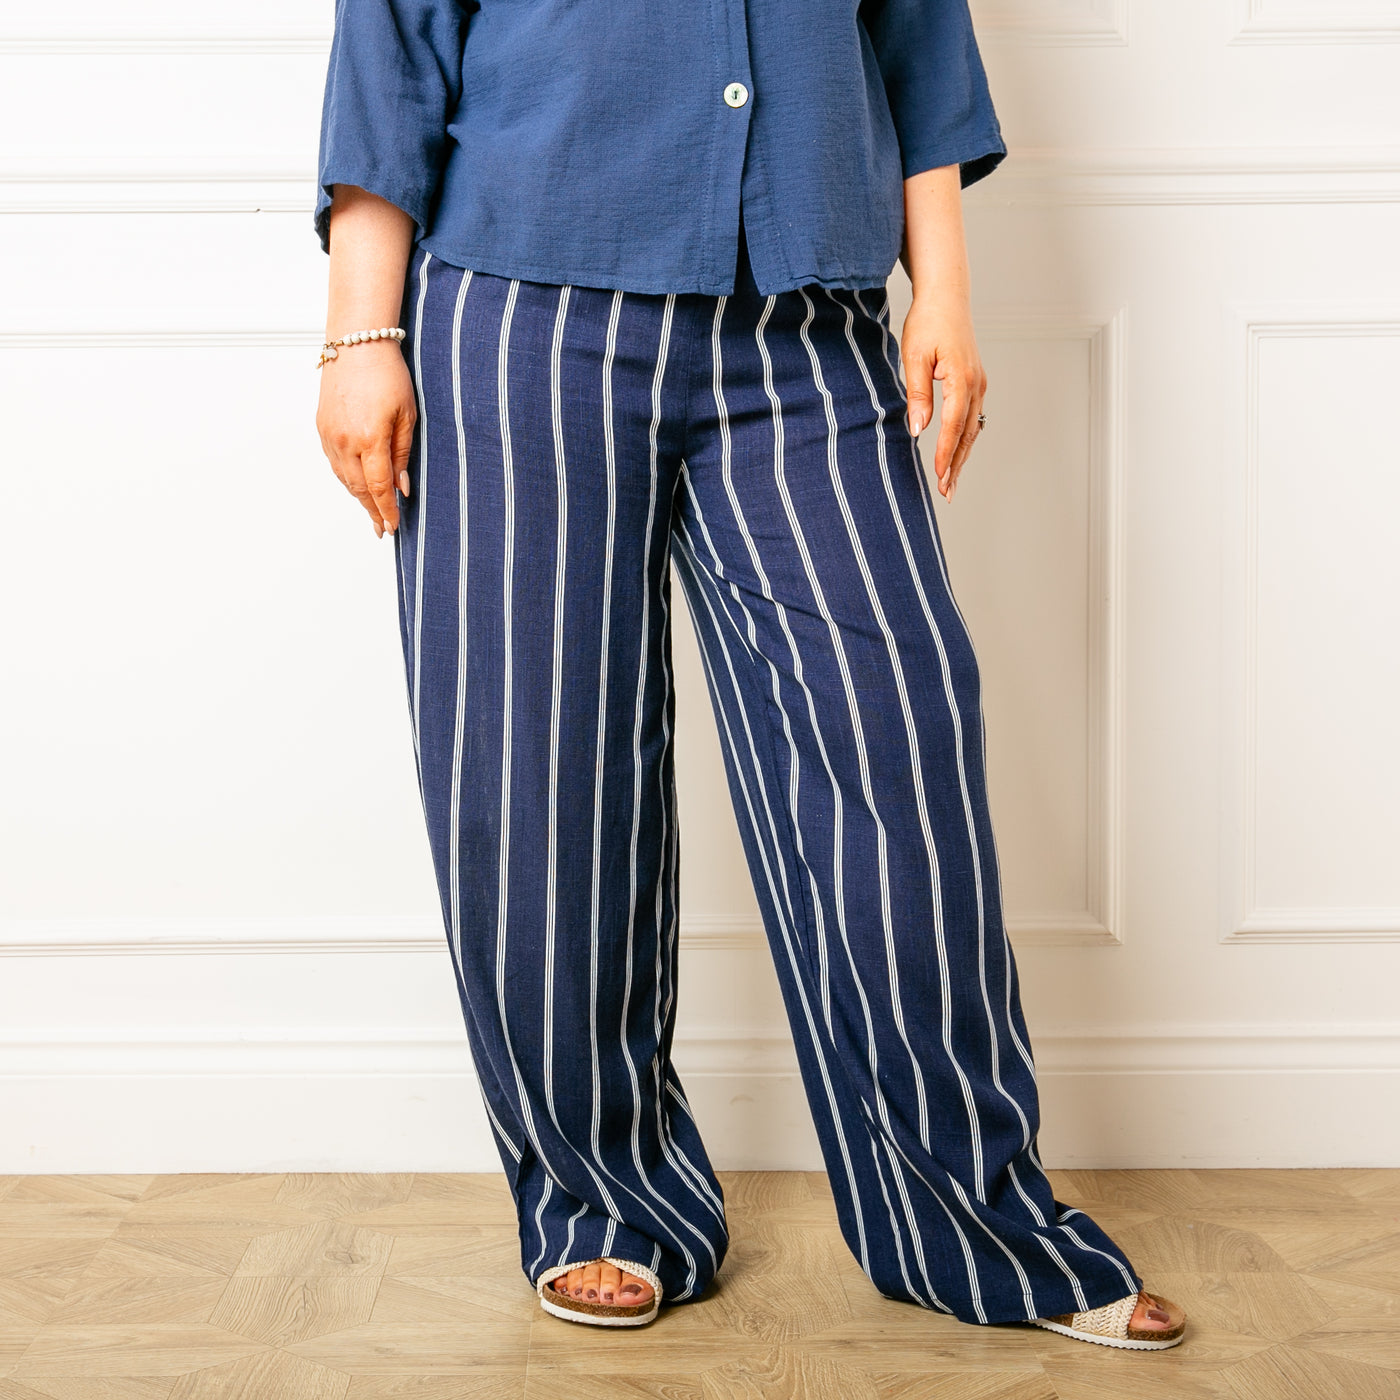 The navy blue Pinstripe Linen Trousers with side pockets and a wide leg silhouette 